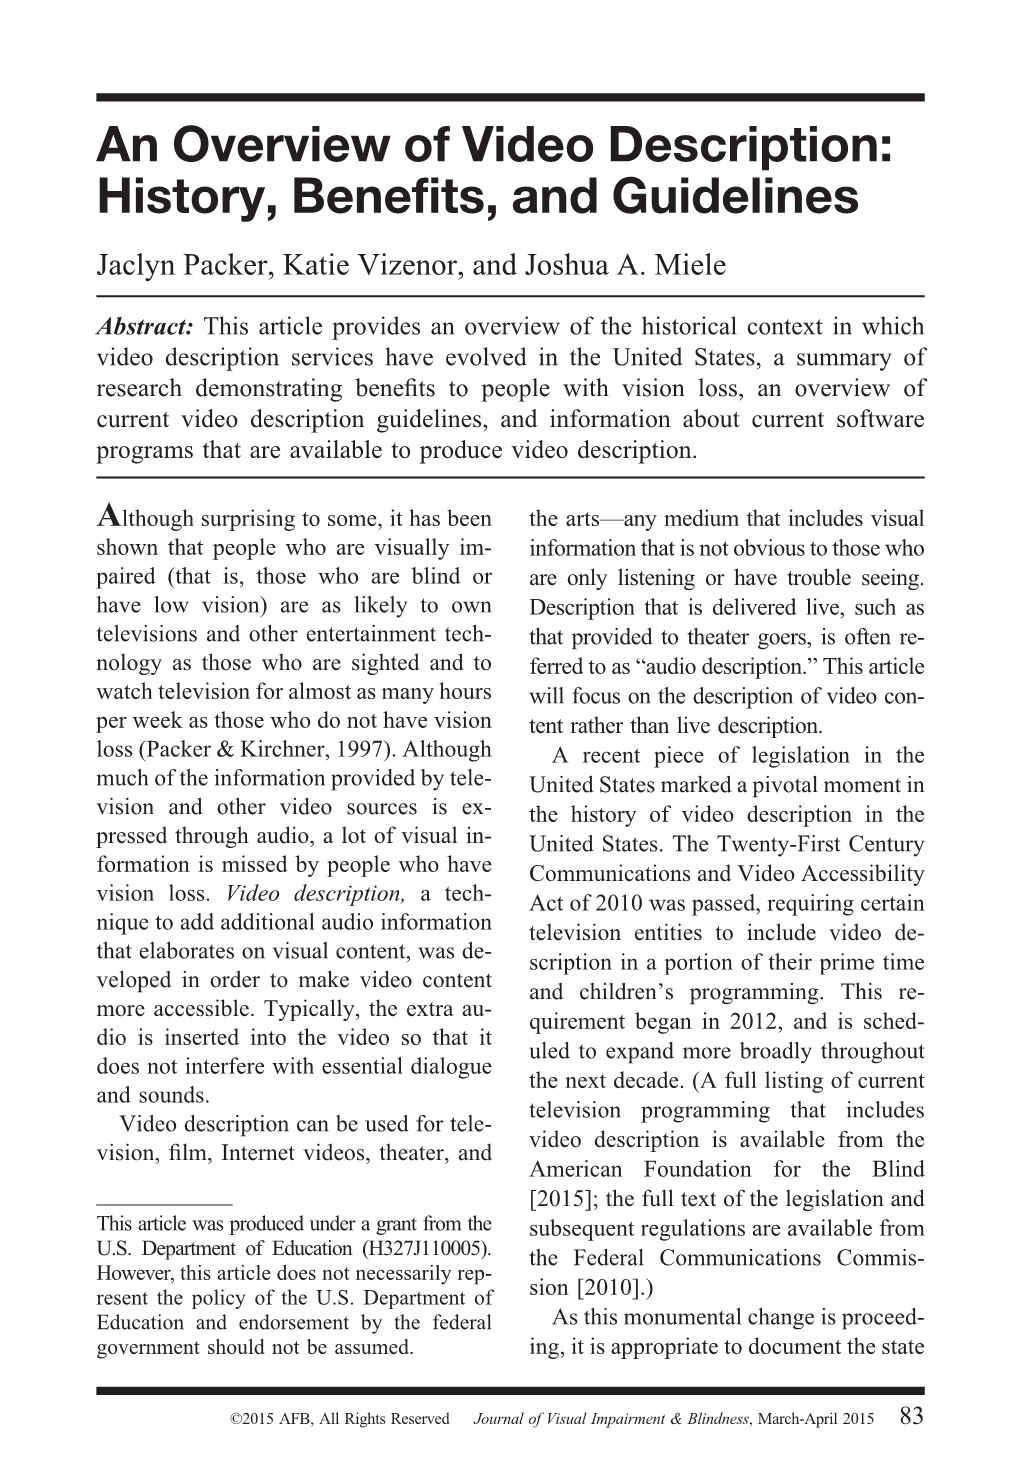 An Overview of Video Description: History, Benefits, and Guidelines Jaclyn Packer, Katie Vizenor, and Joshua A